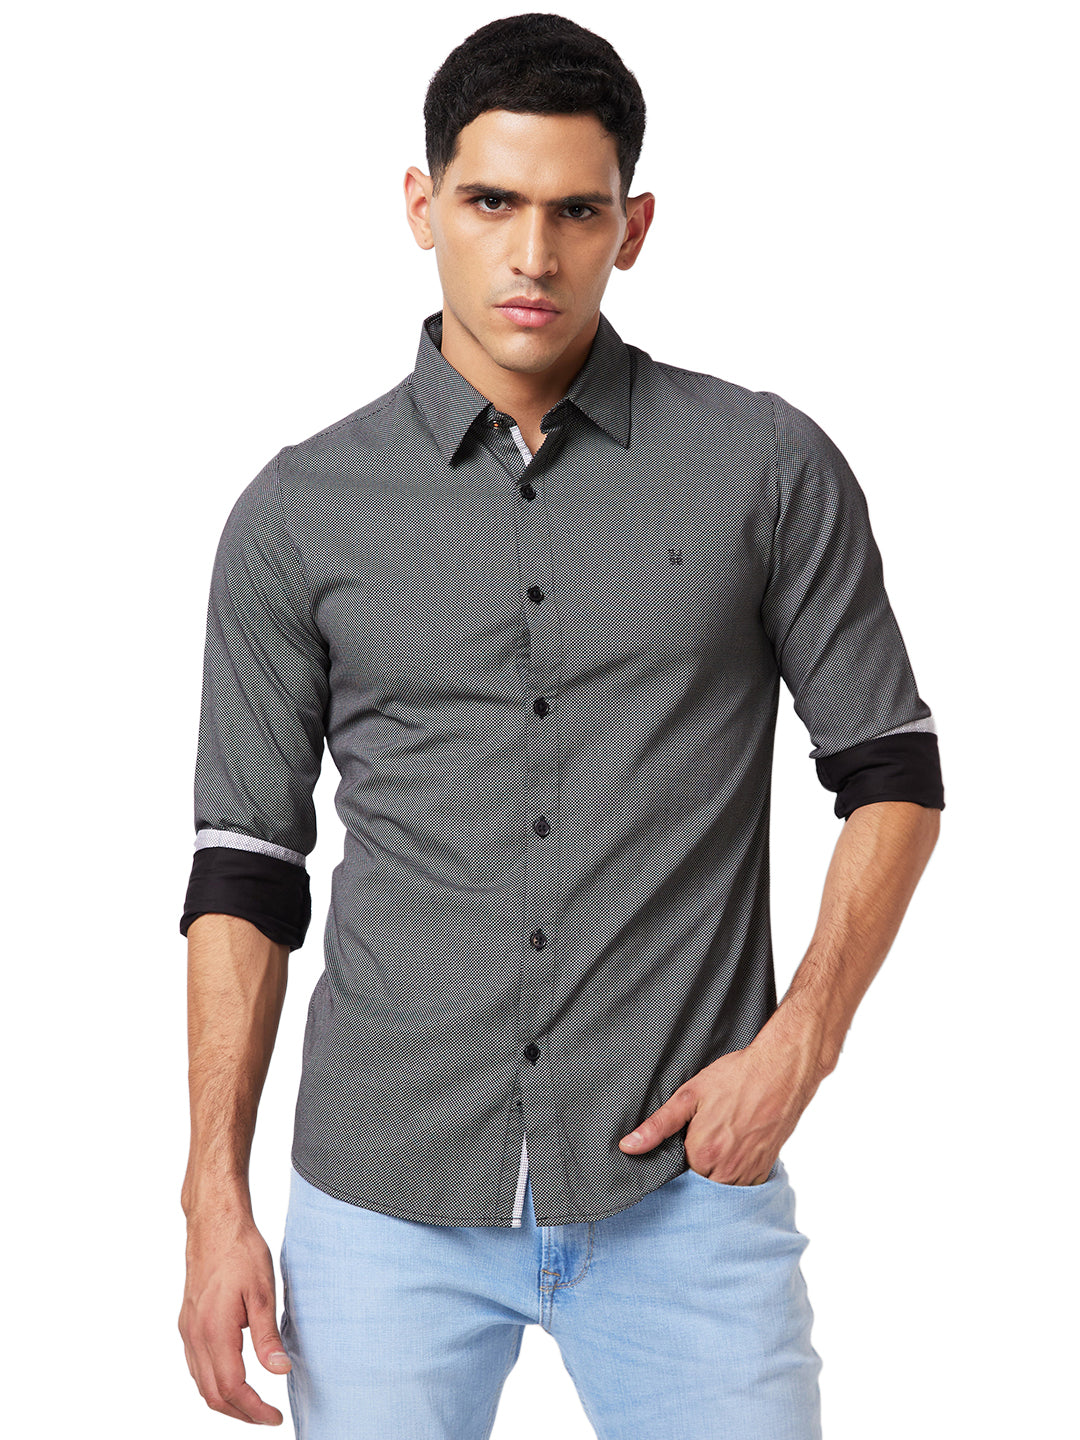 What Color Shirt Goes with Grey Pants? 30+ Outfit Ideas